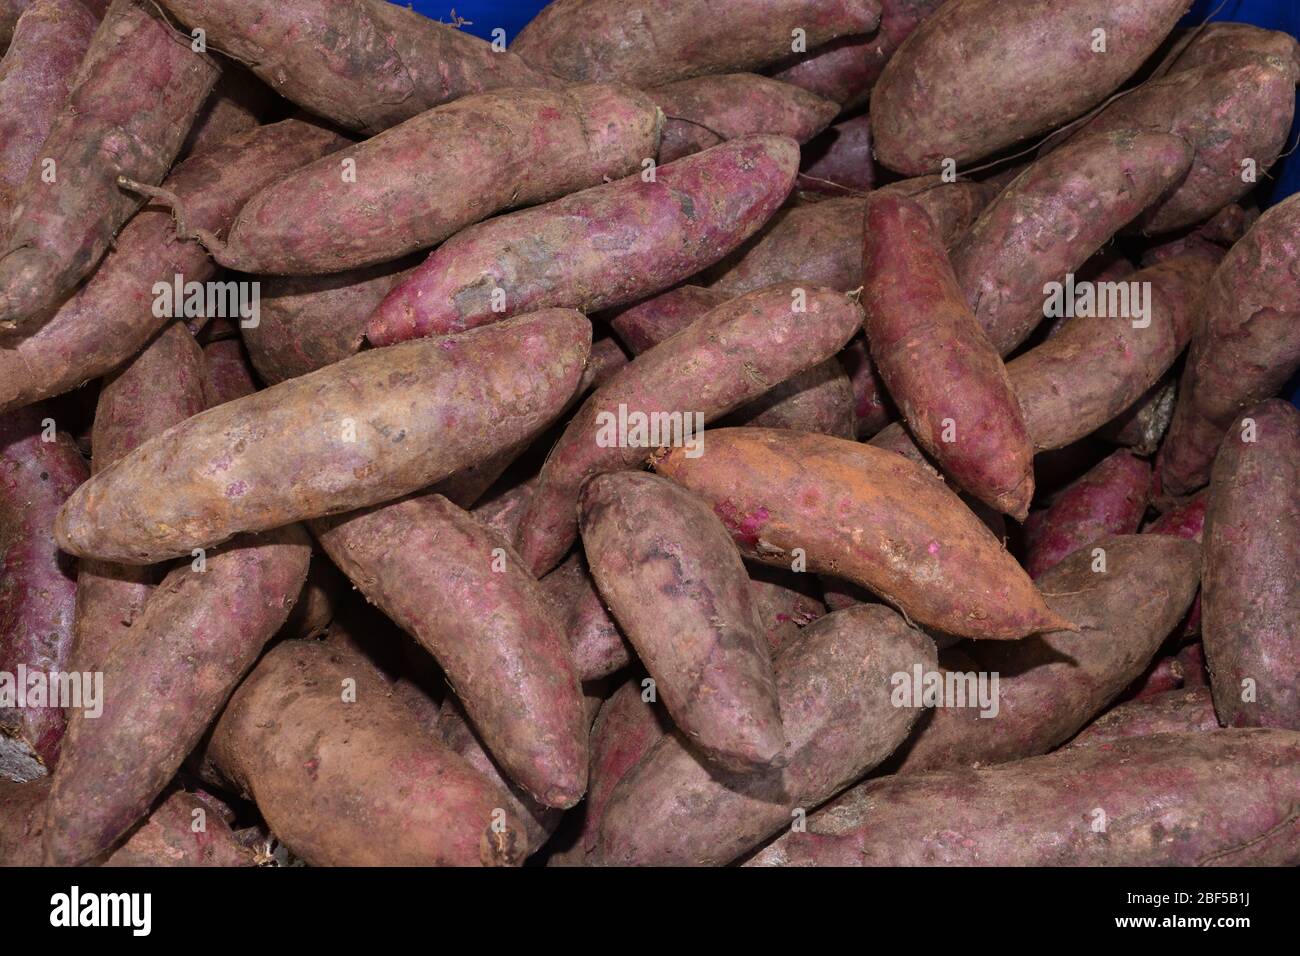 sweet potato or yam pile image which can be used as a background, note select focus with shallow depth of field Stock Photo